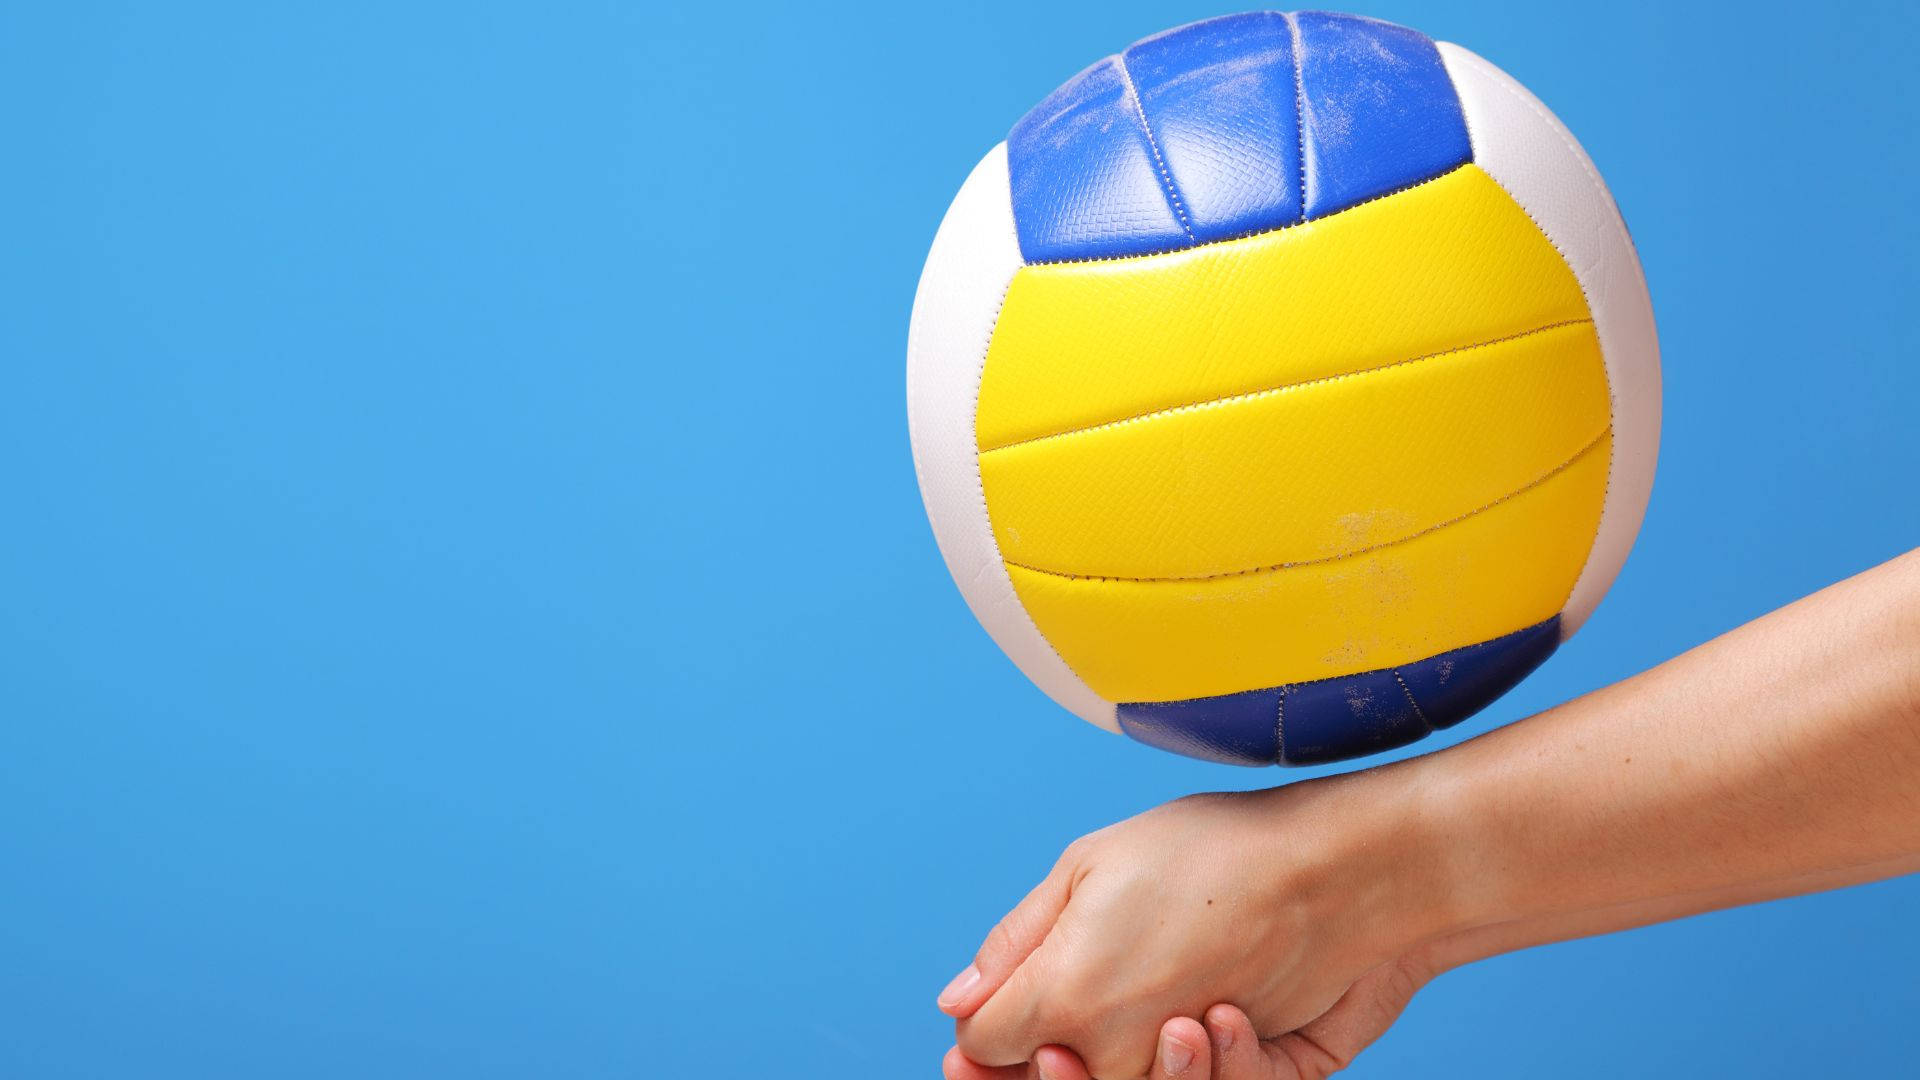 A person holding up an object with their hand - Volleyball